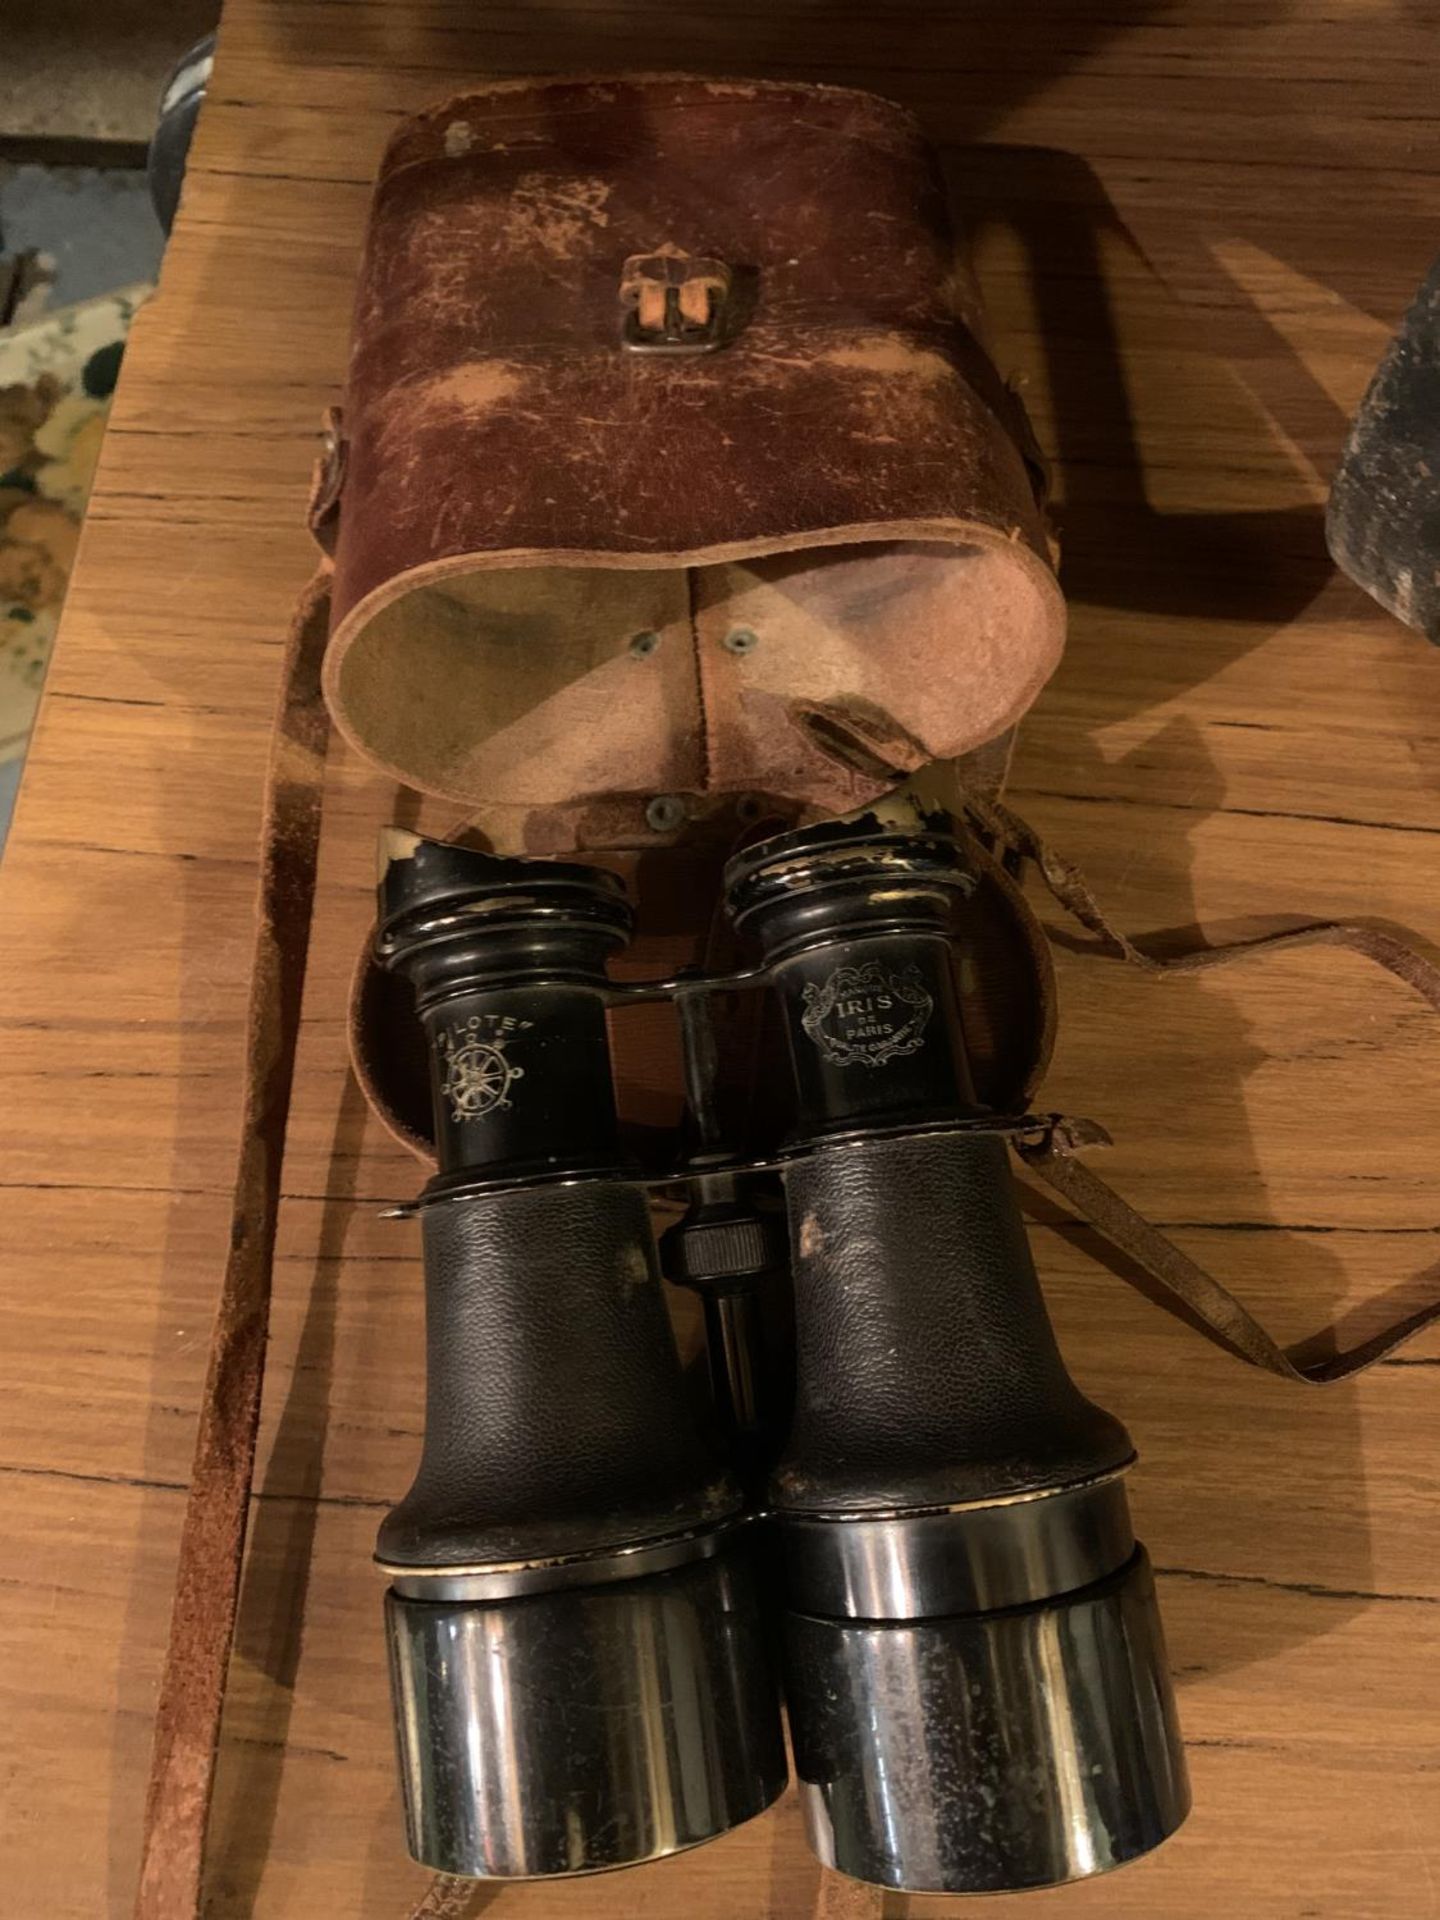 A PAIR OF EARLY 20TH CENTURY PILOTE BINOCULARS BY IRIS DE PARIS WITH LEATHER CASE